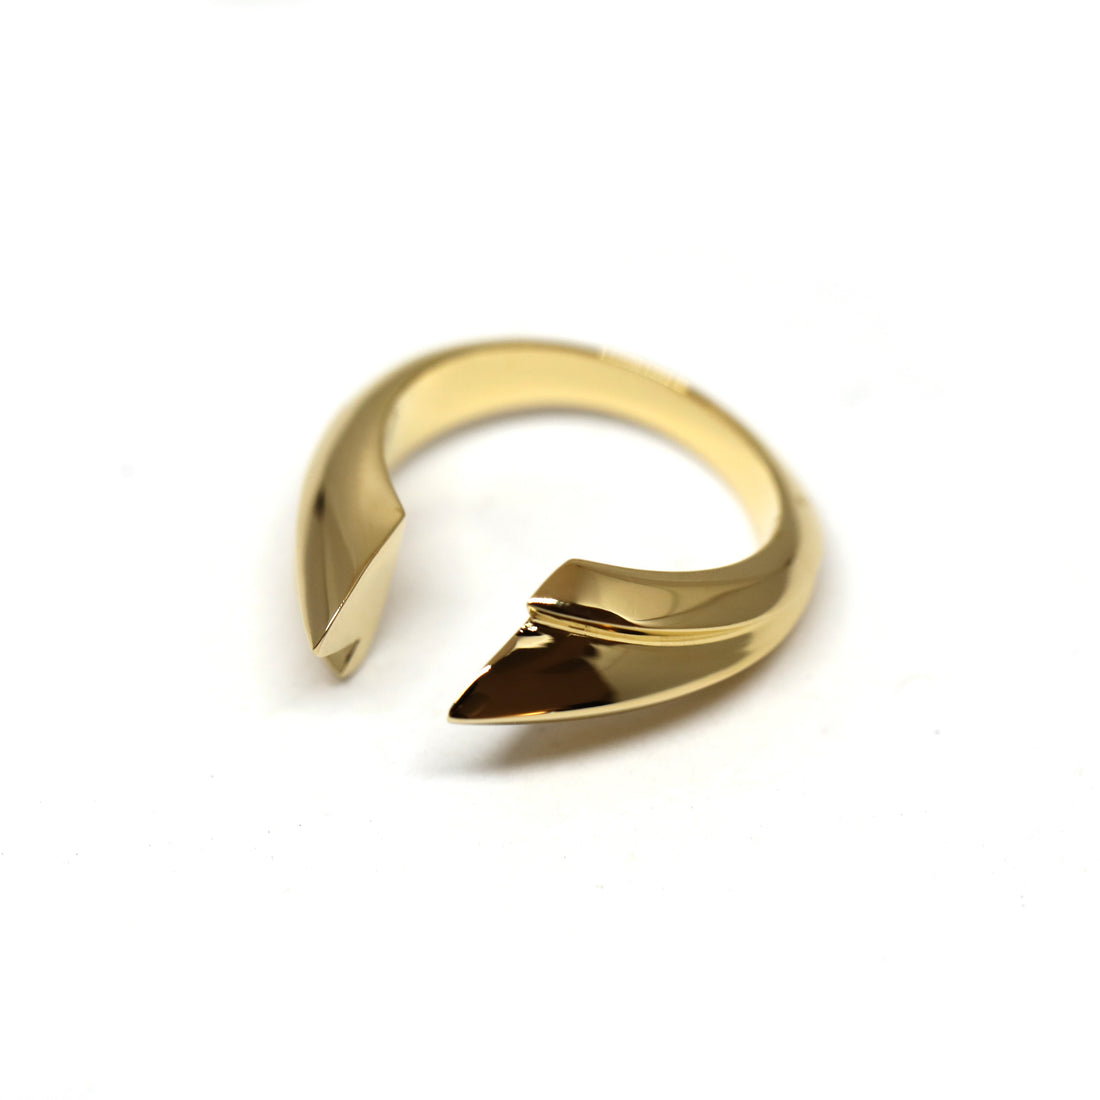 Top view of vermeil gold edgy ring bena jewelry montreal handmade in canada yellow gold ring plated silver fine jewelry designer custom bridal and unisexe cocktail jewelry montreal little italy jeweler